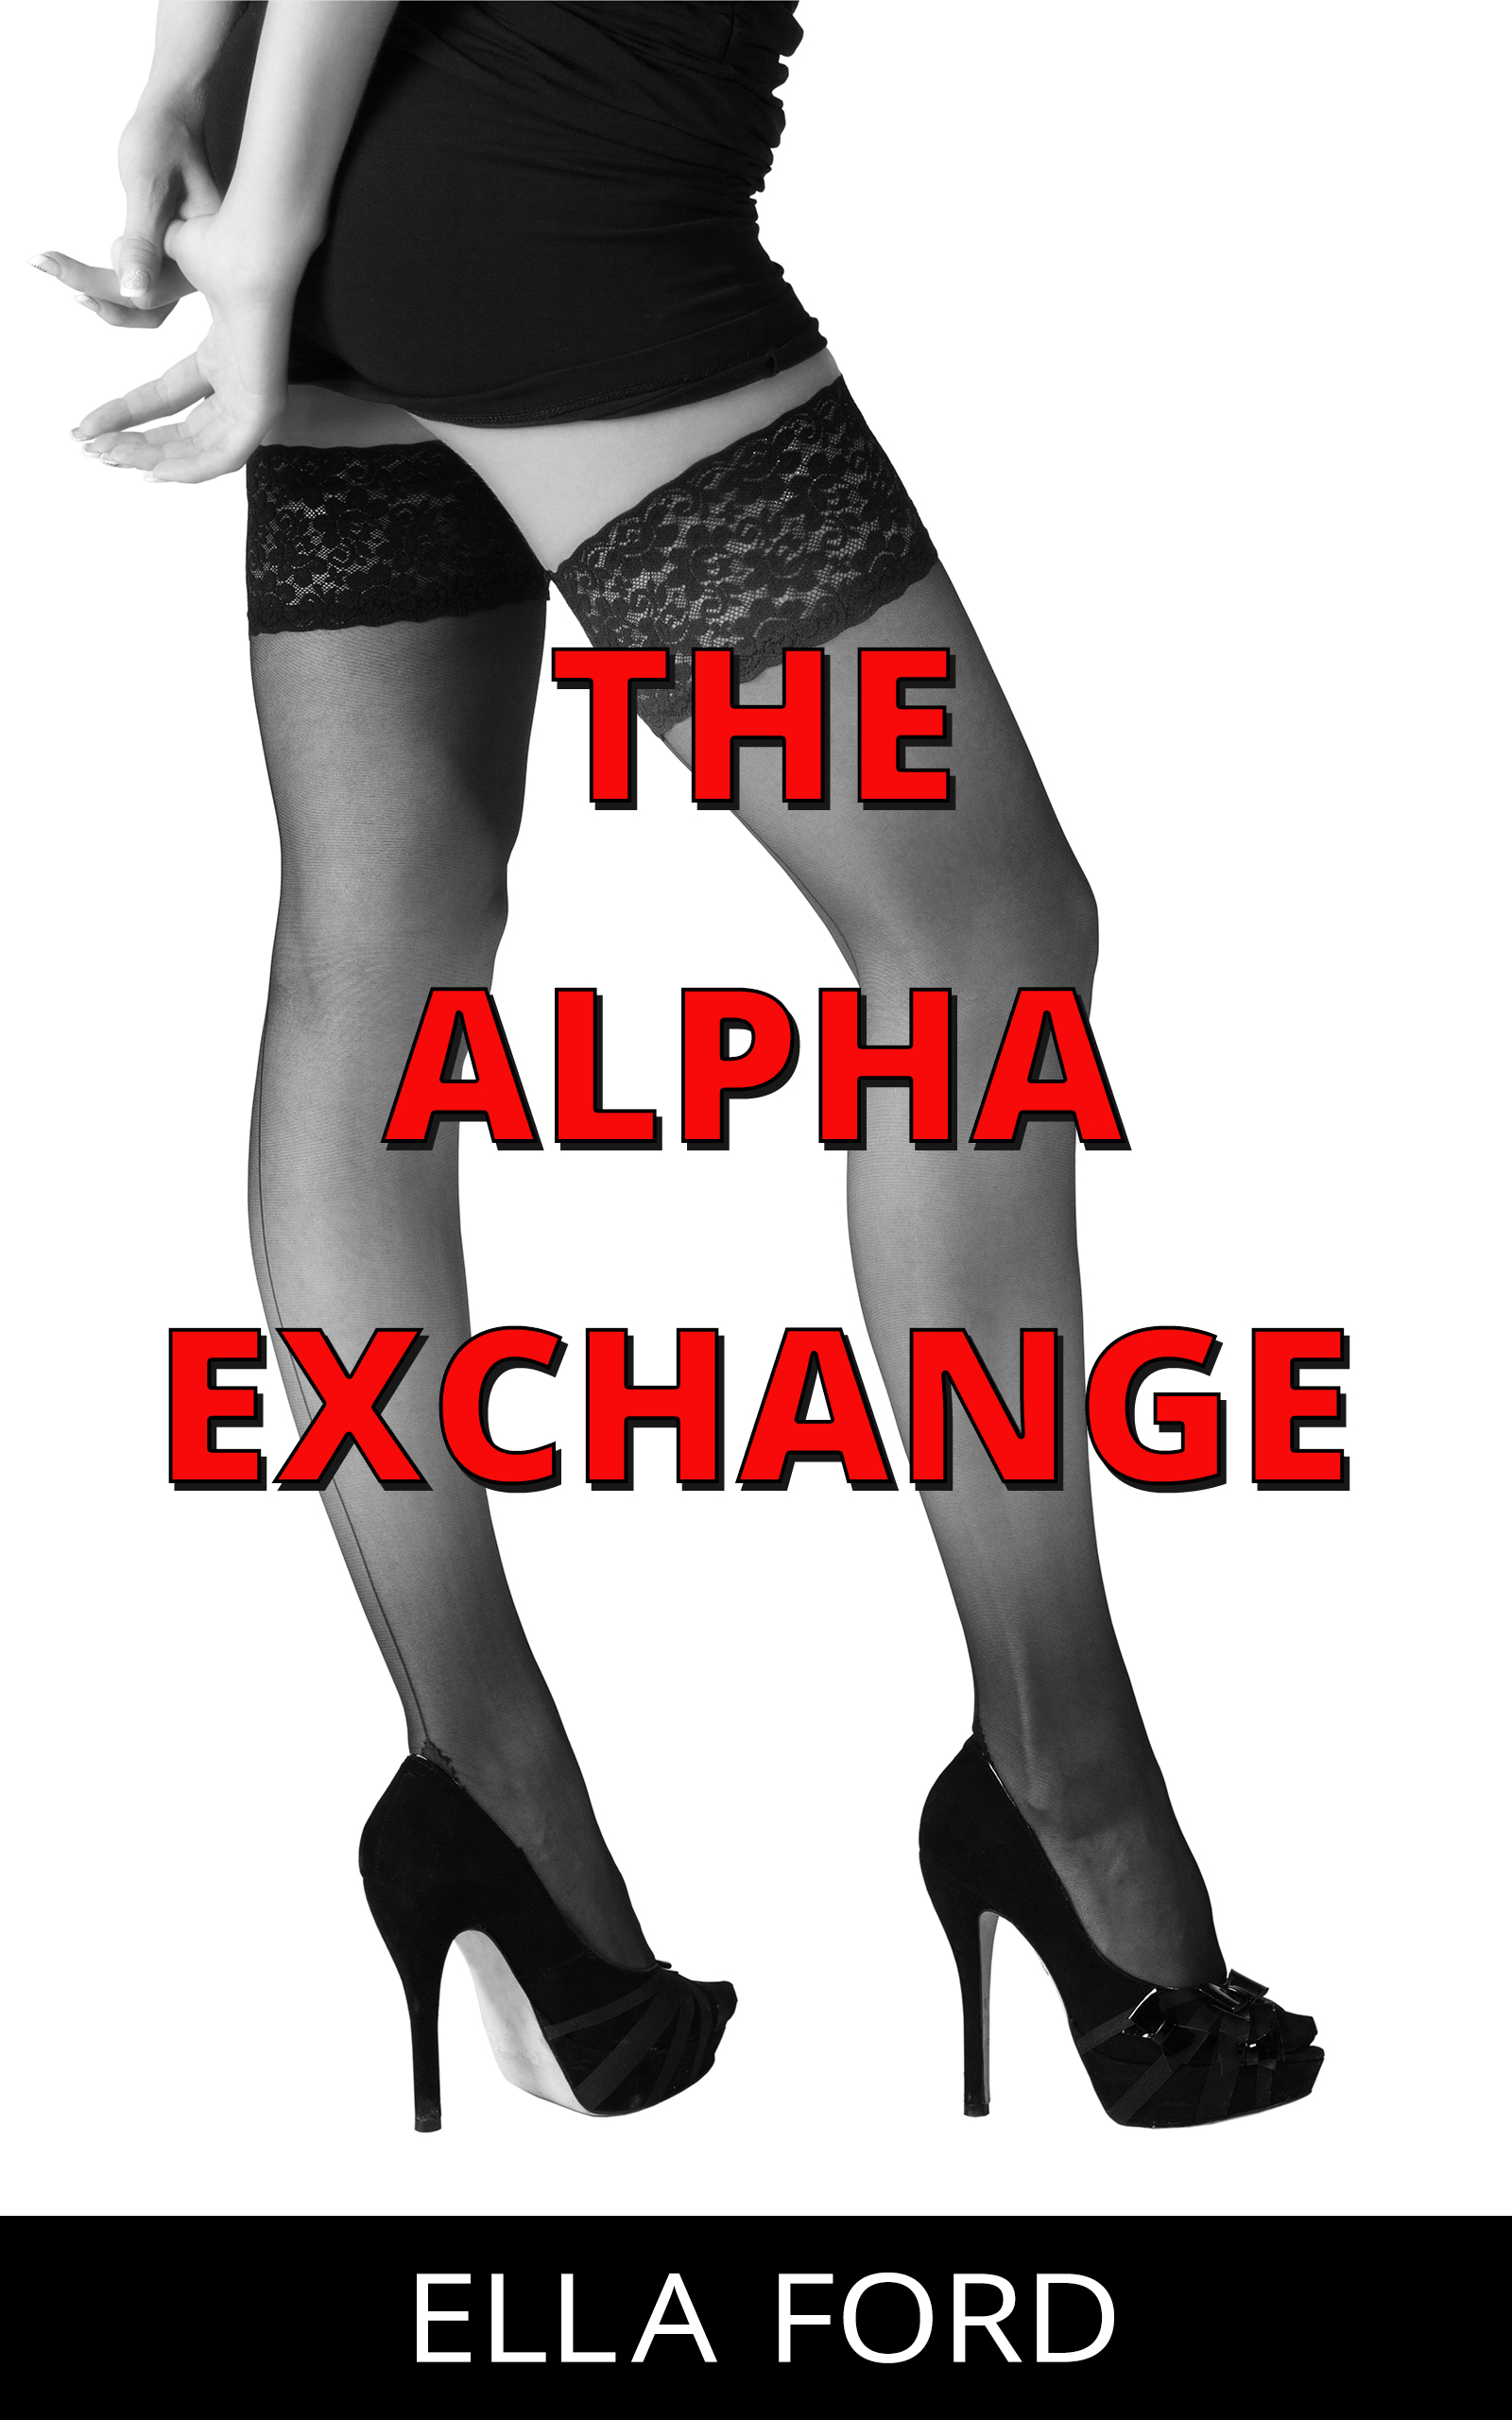 The Alpha Exchange by Ella Ford